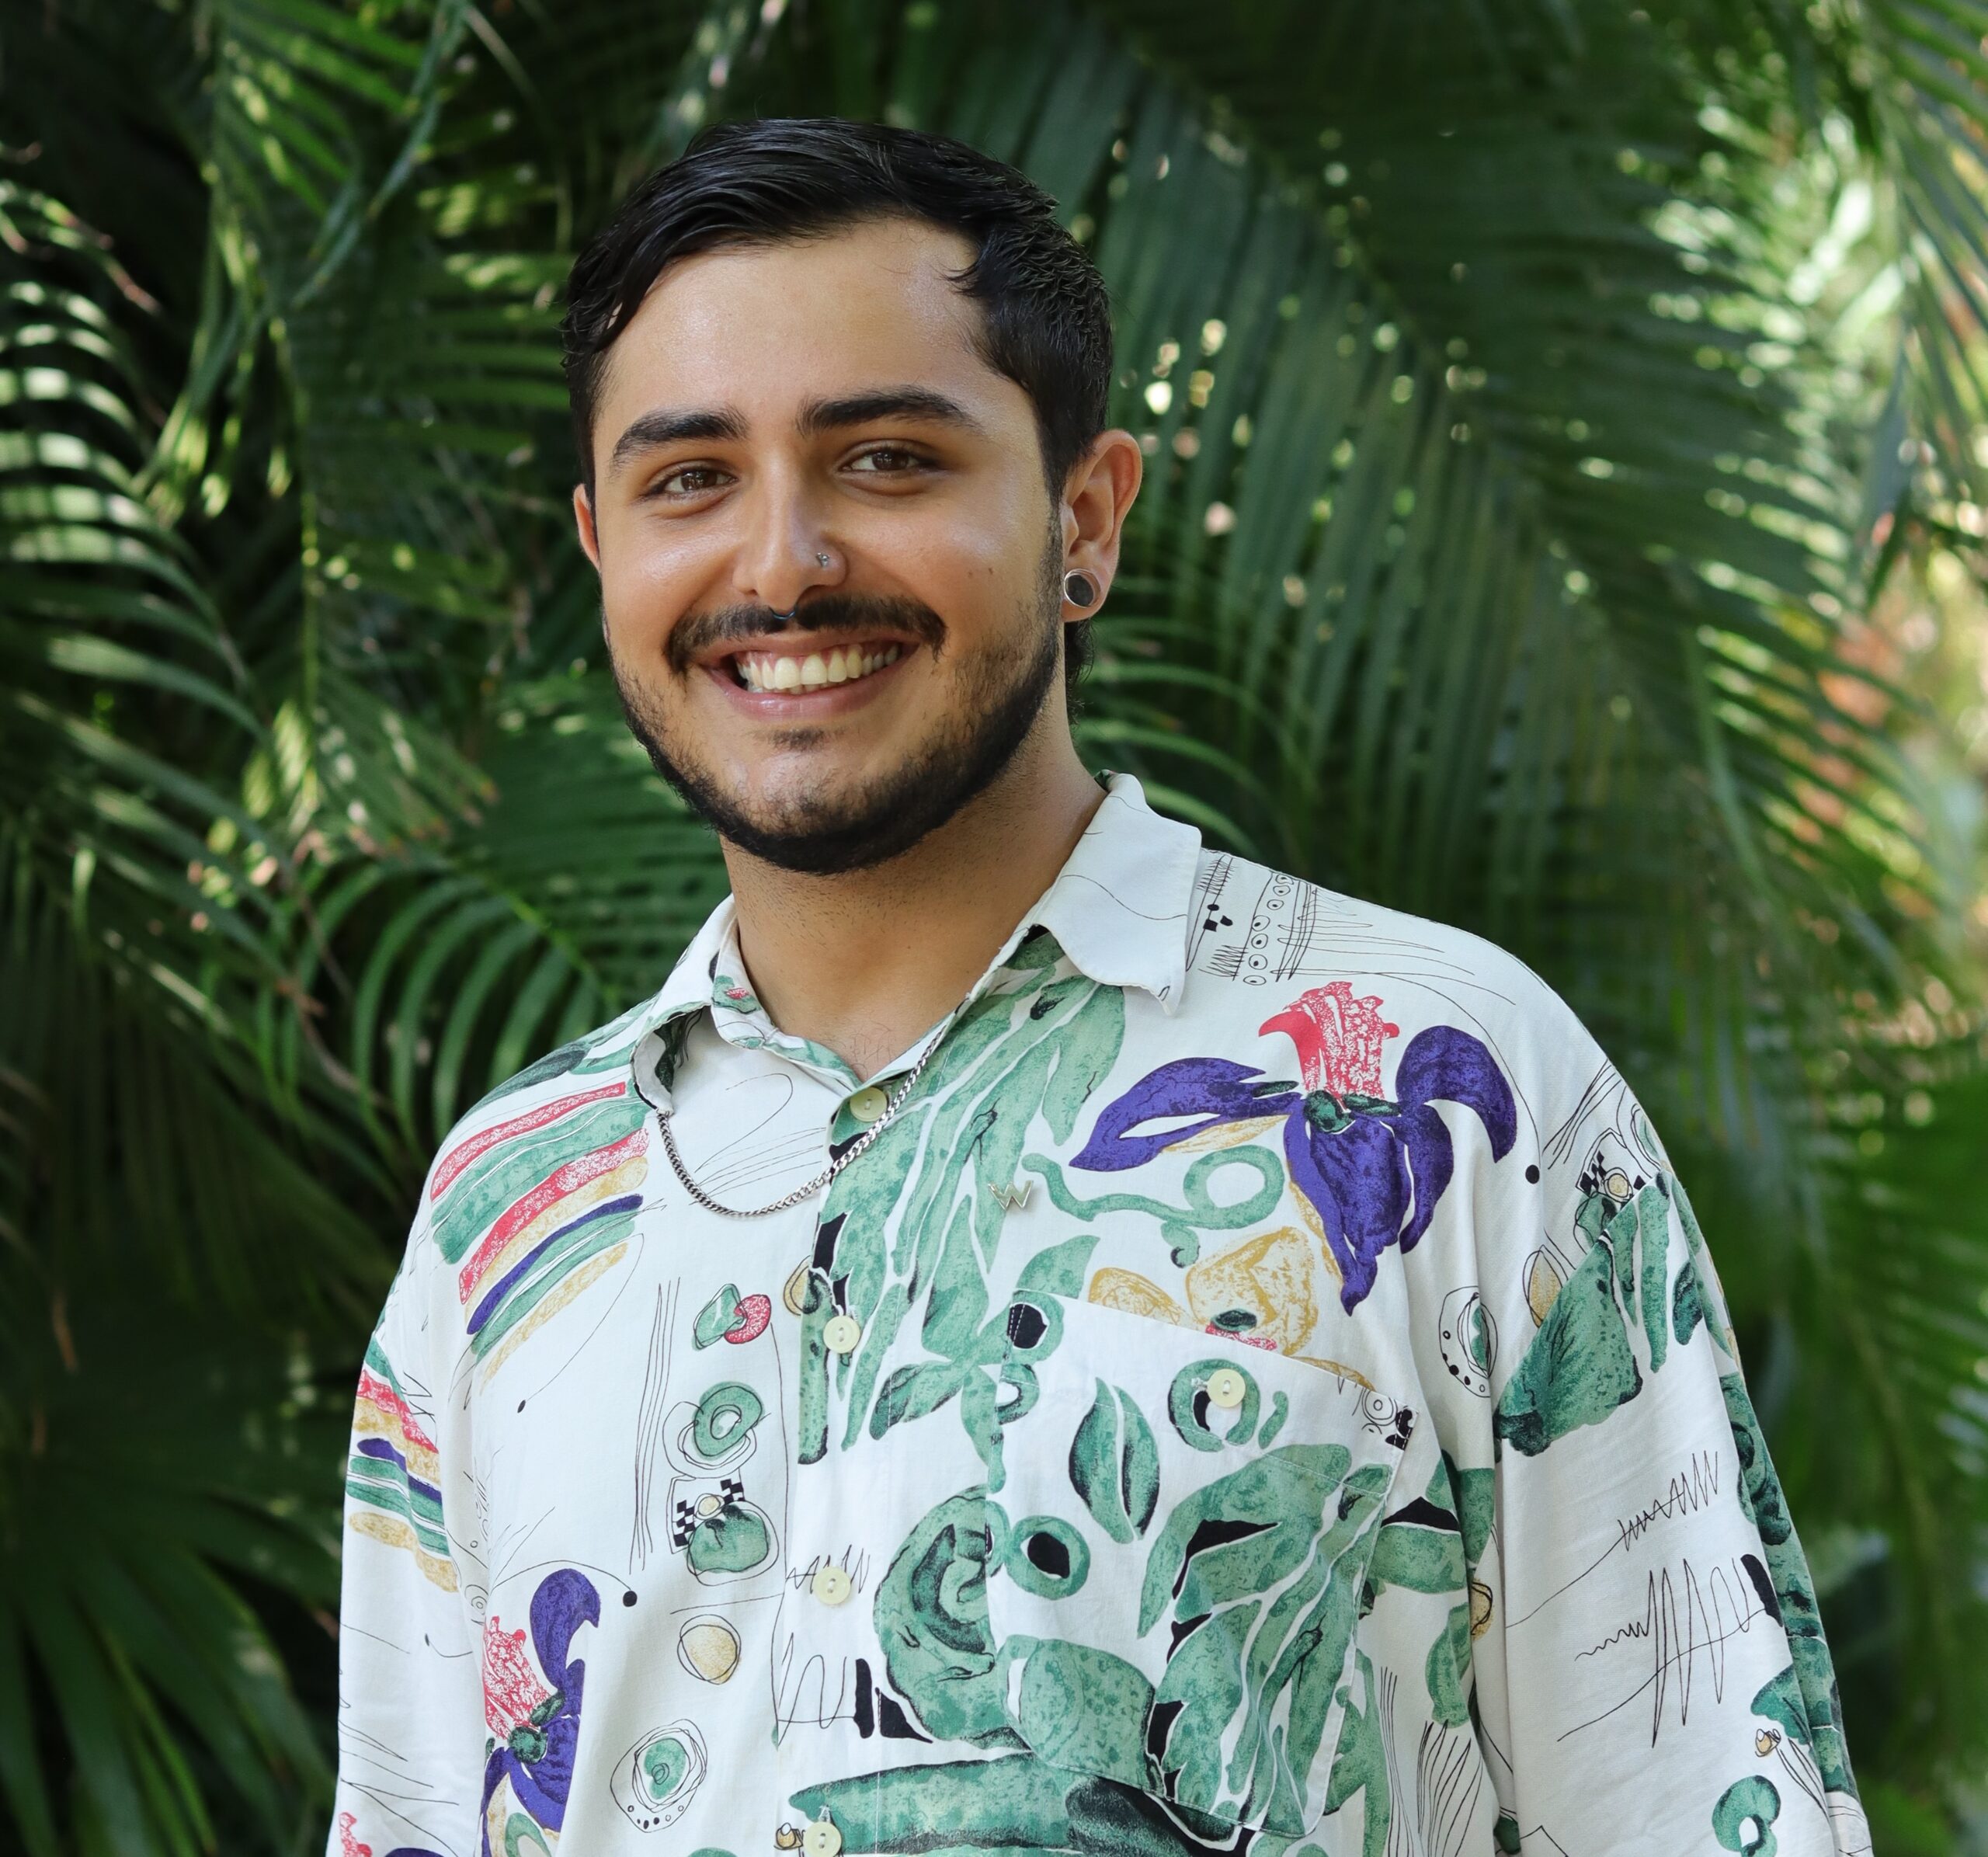 A person with short dark hair and a beard smiles at the camera. They are wearing a colorful, patterned shirt with various illustrations of plants and shapes. The background is filled with lush green foliage.